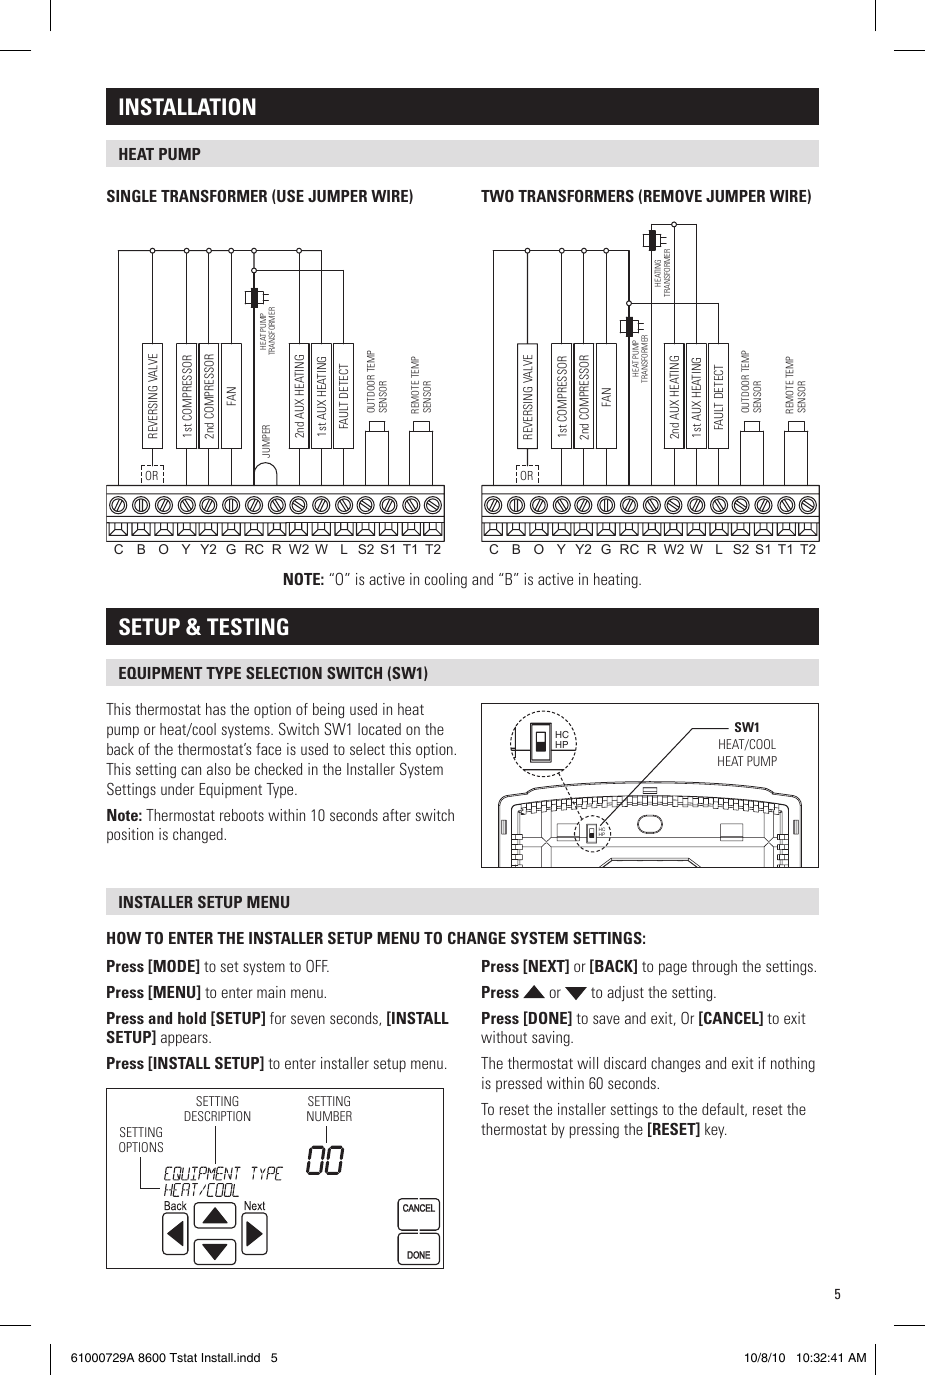 Aprilaire Humidifier Wiring Diagram - Wiring Diagram